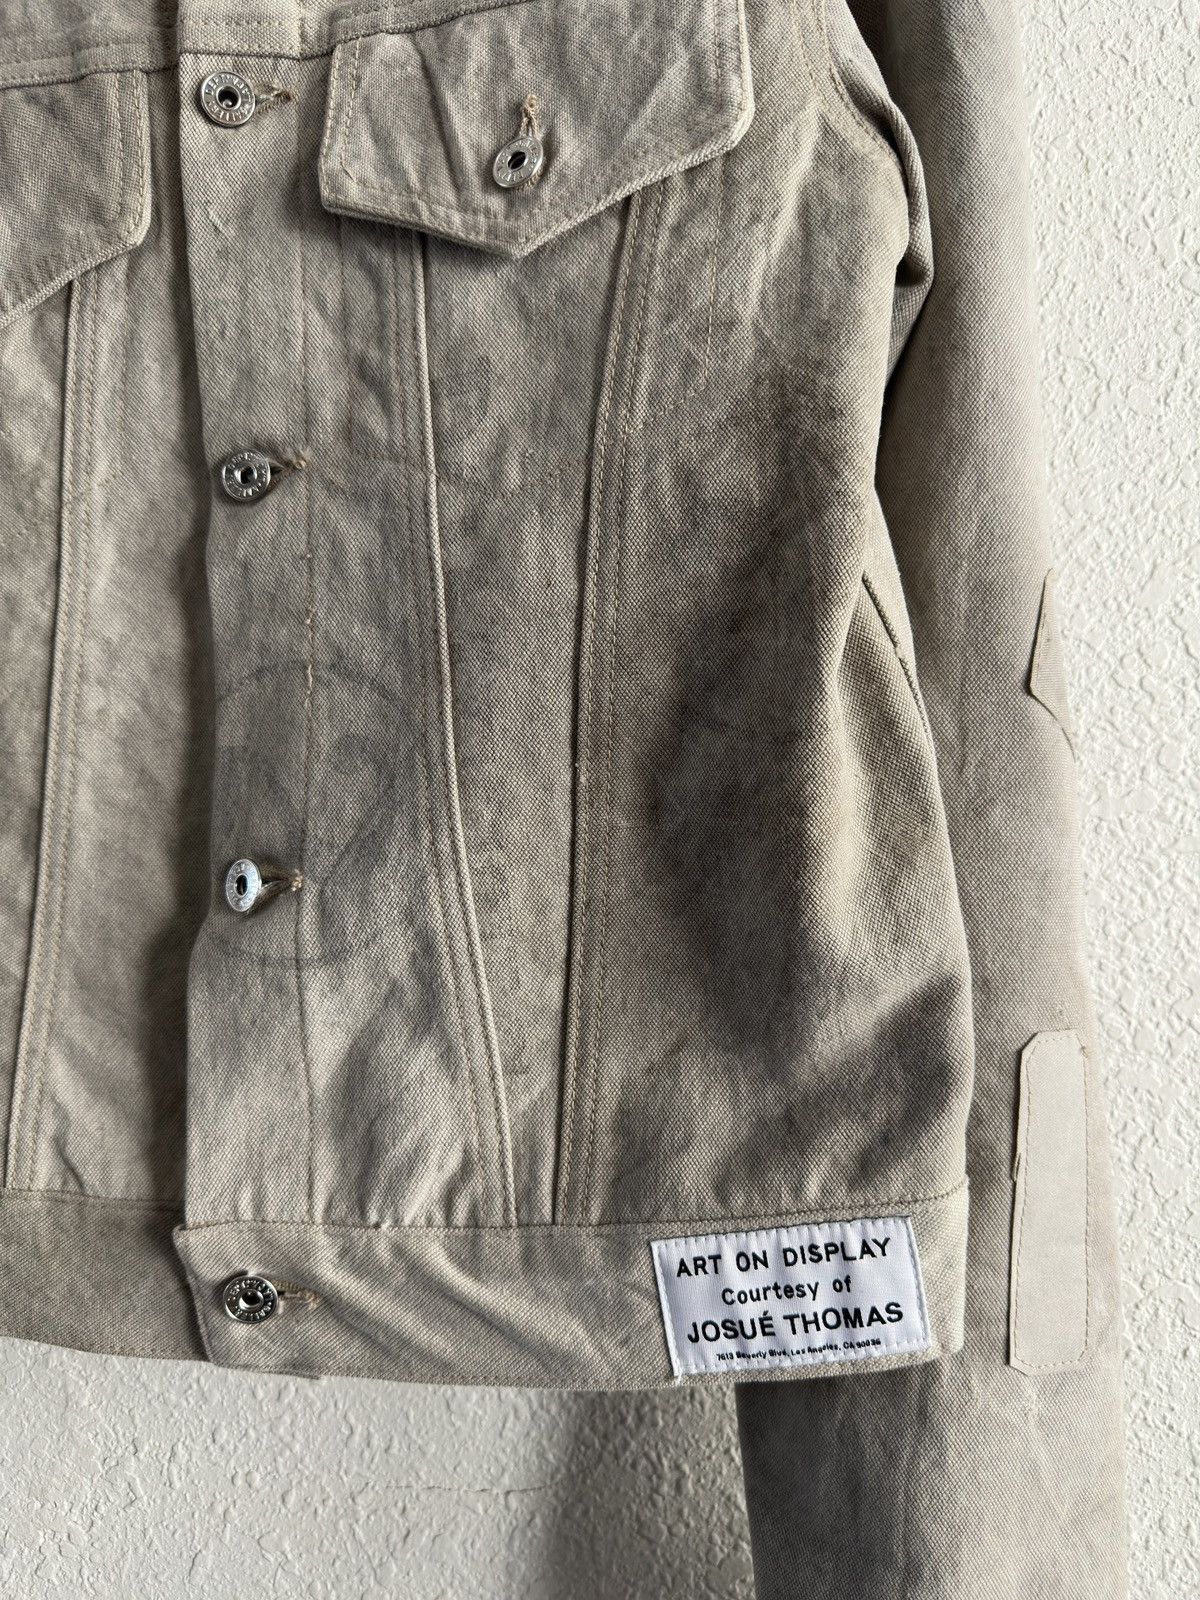 Gallery Dept. Andy Rider Jacket | Grailed